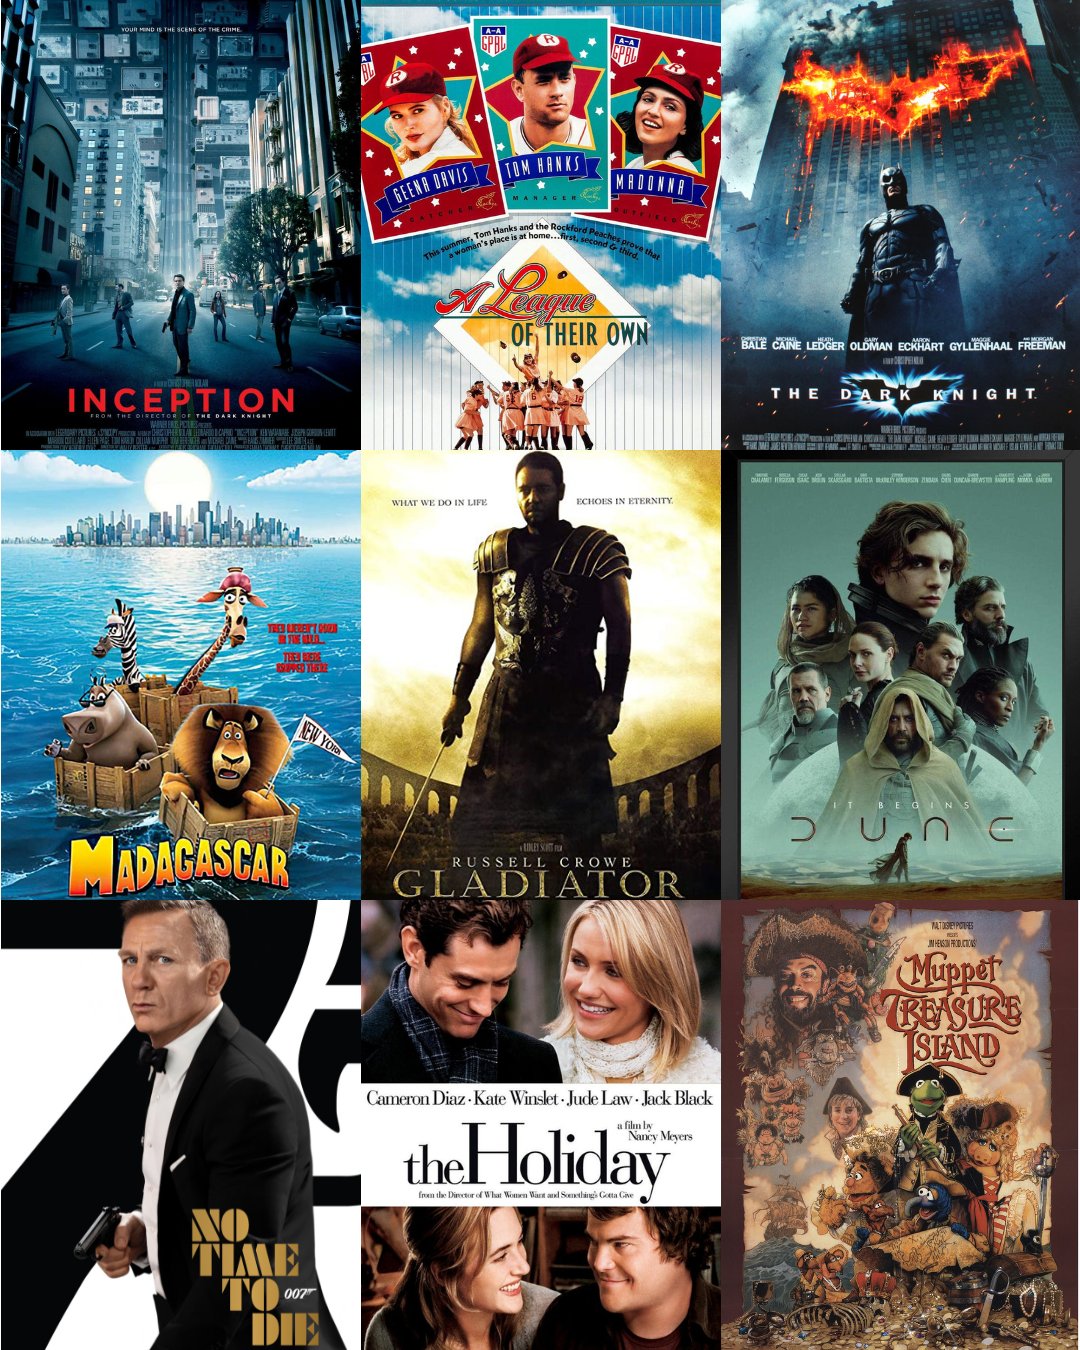 Låne overfladisk Urimelig IMDb on Twitter: "Which of these films has the best Hans Zimmer piece?  https://t.co/ZGRPsv7qnz" / Twitter